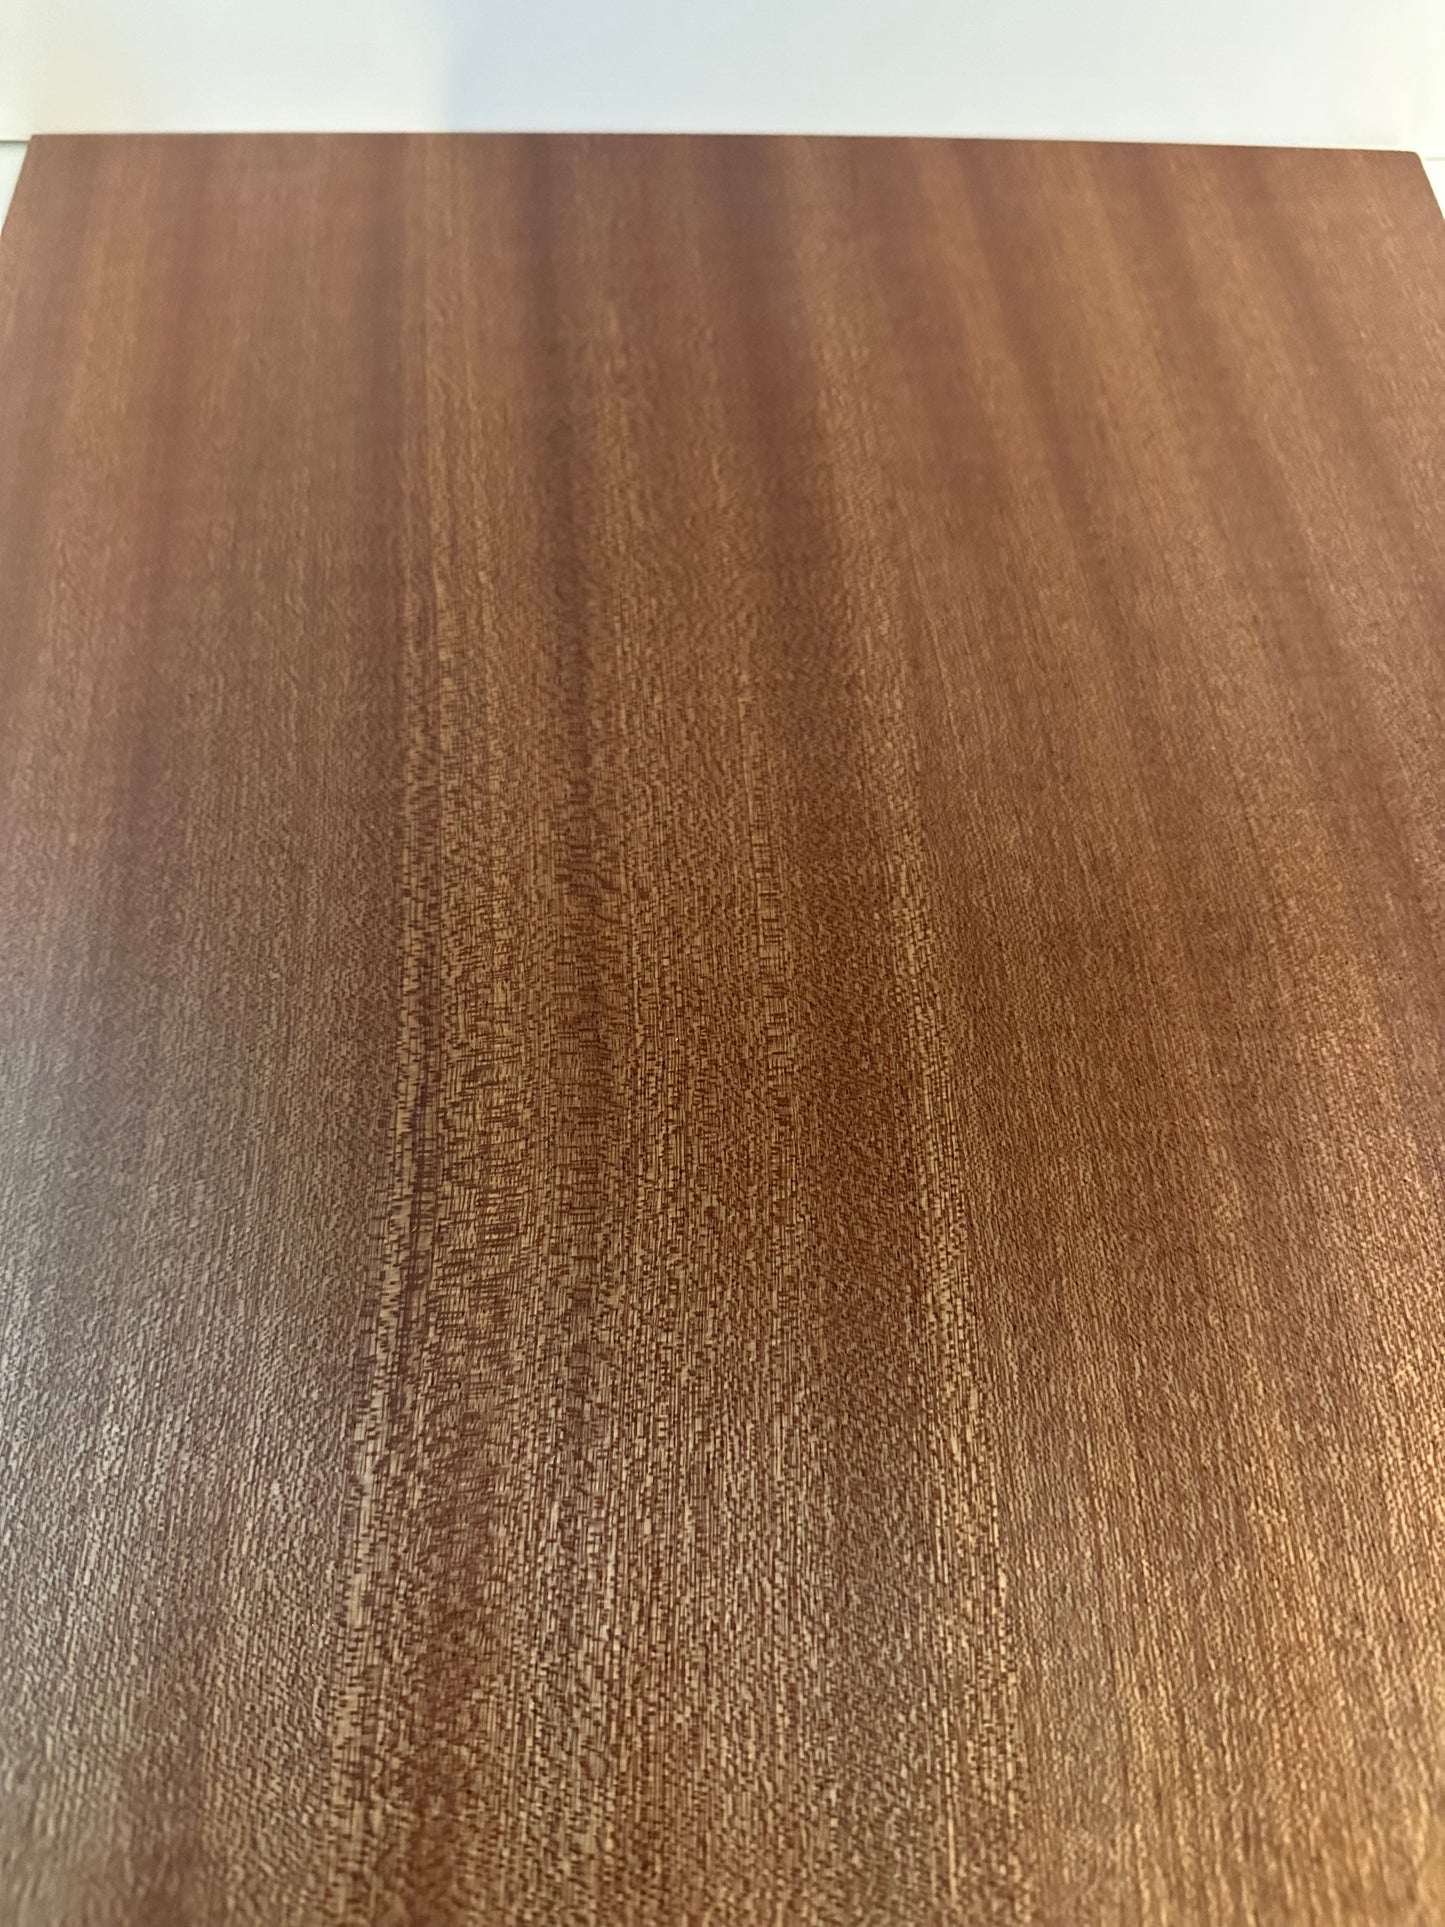 Pre-Finished 5/32 Sapele for laser cutters / Double sided, MDF core